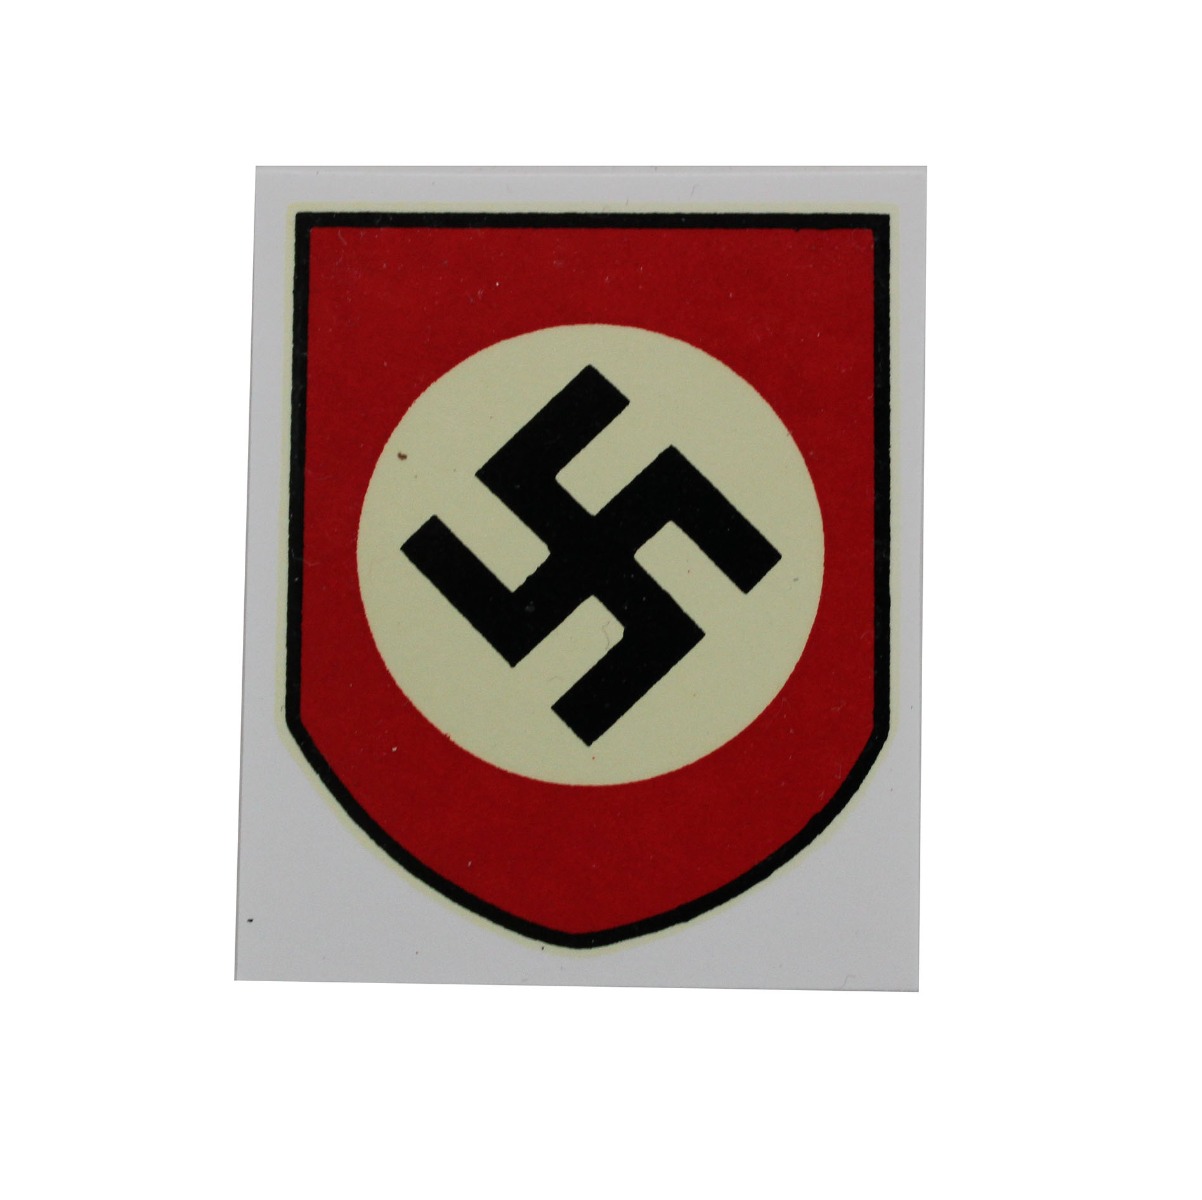  NATIONAL SOCIALIST PARTY SHIELD HELMET DECAL 